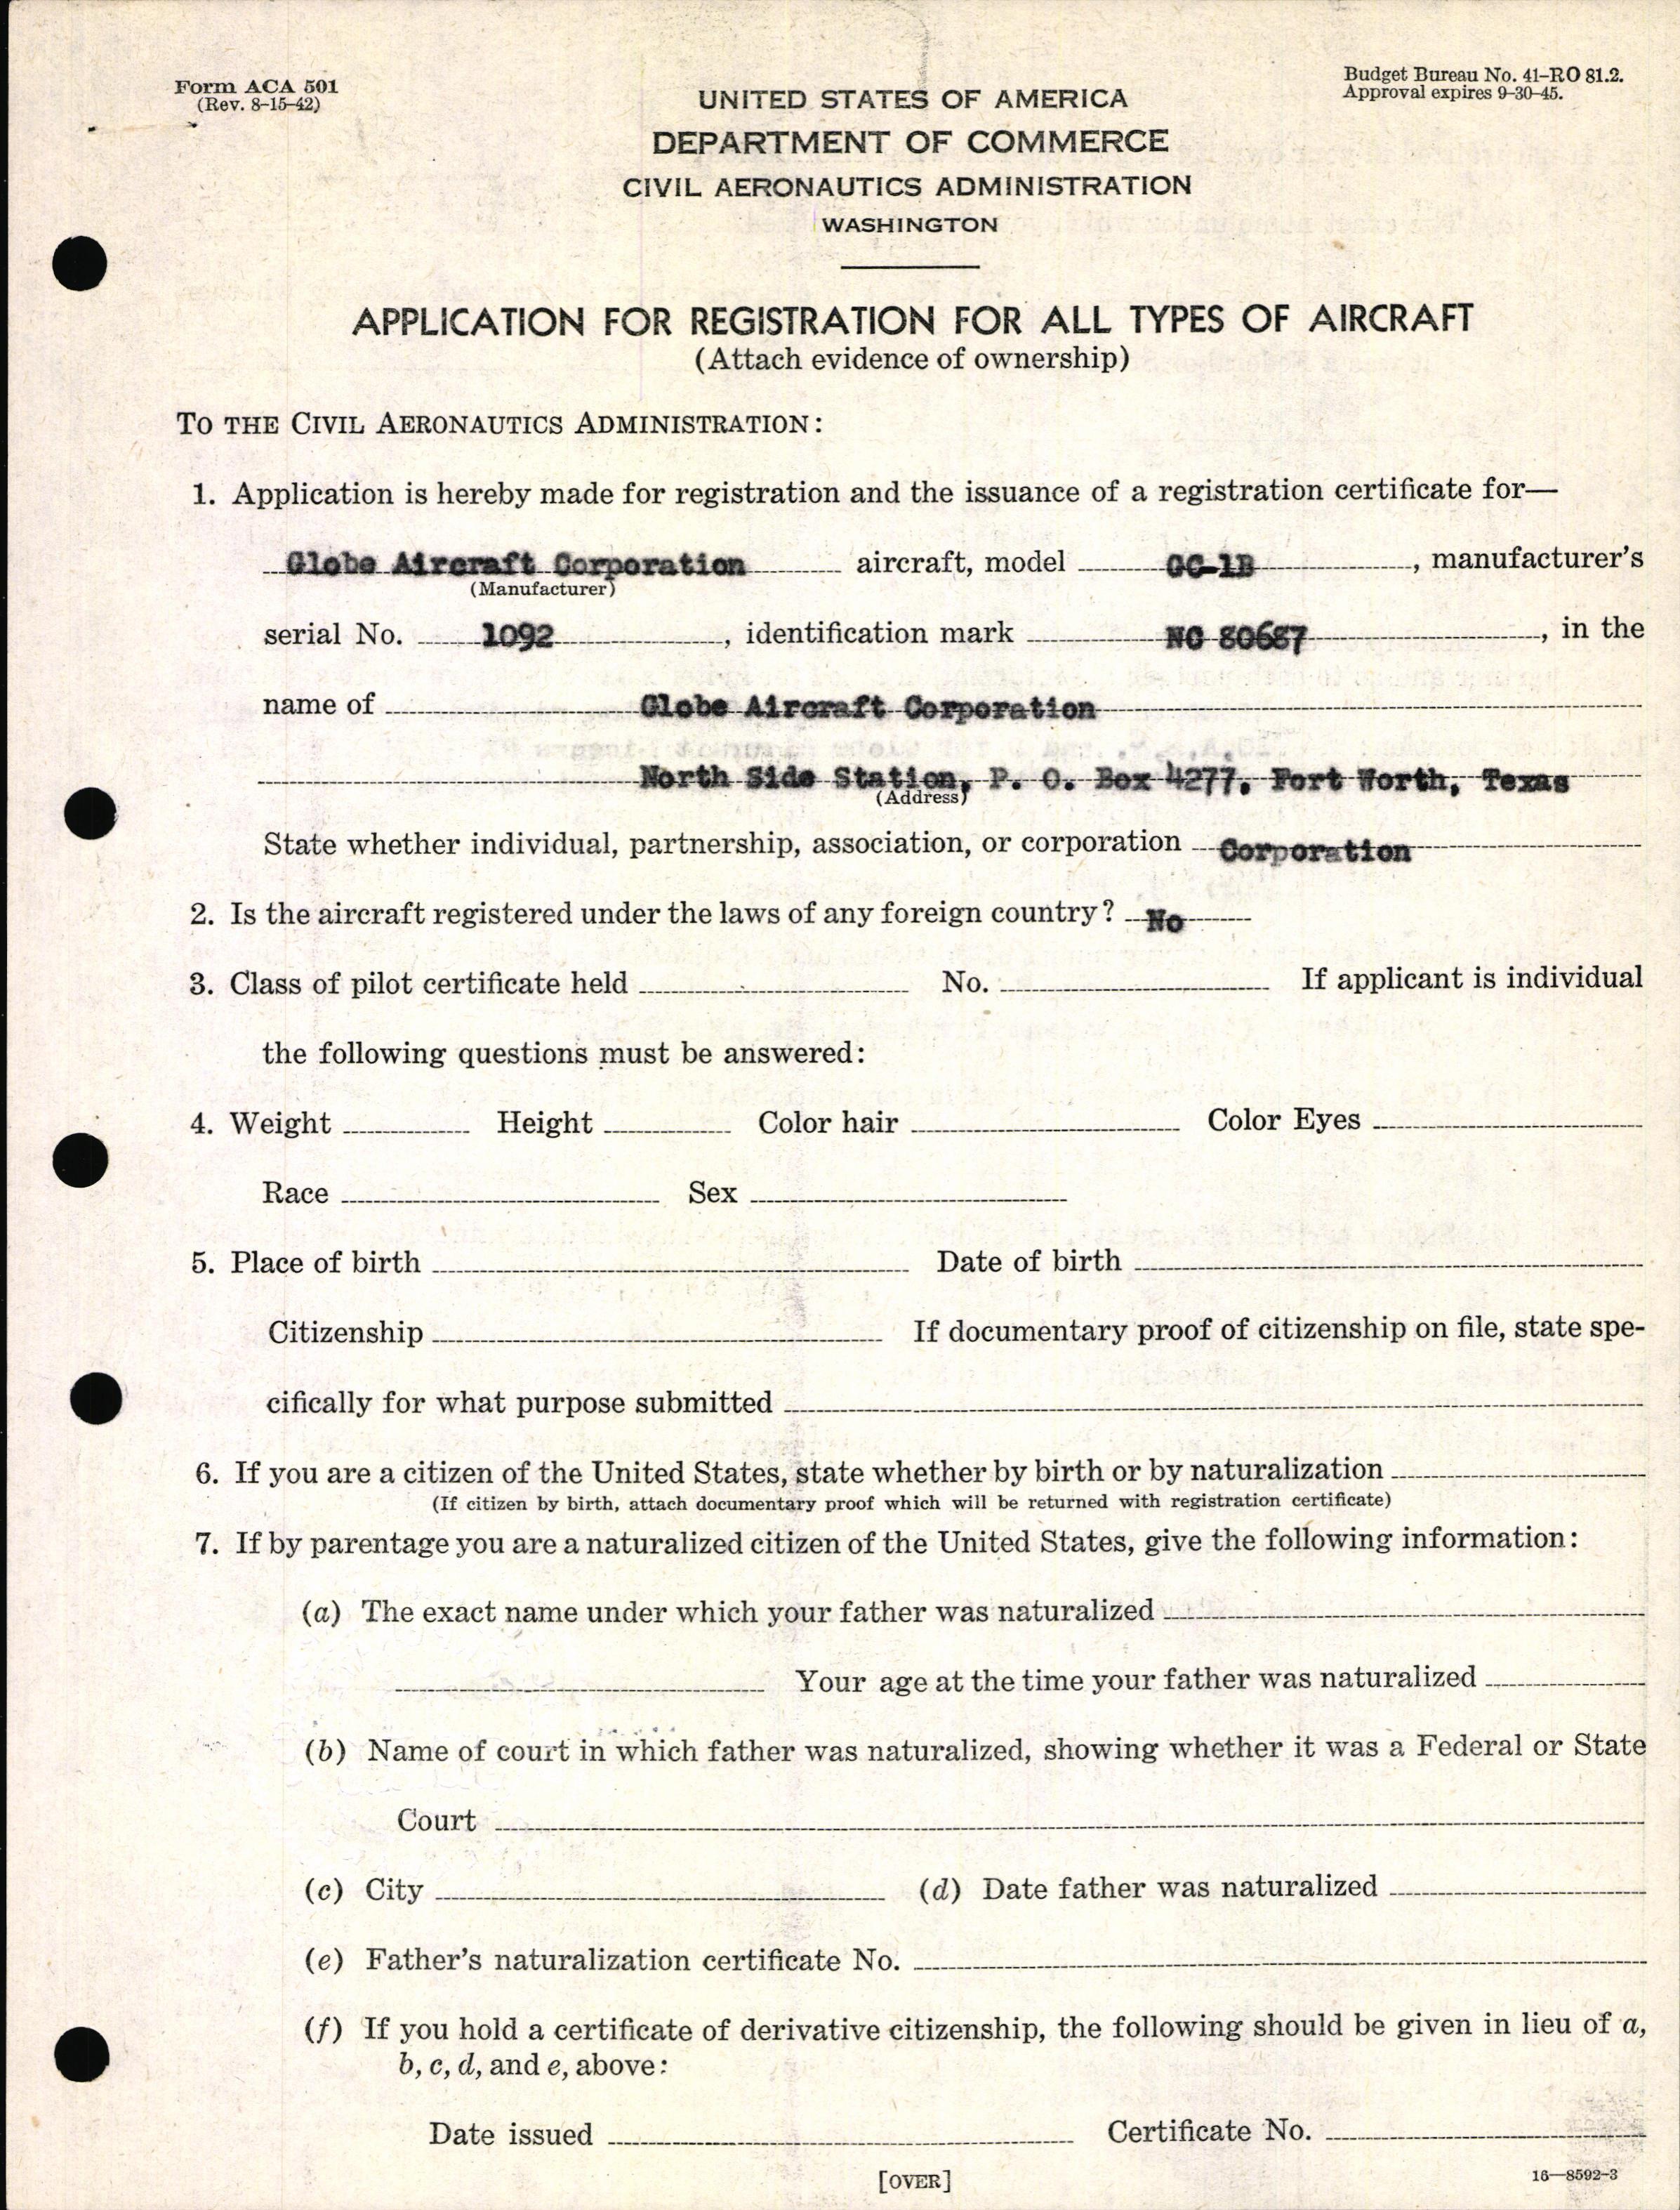 Sample page 3 from AirCorps Library document: Technical Information for Serial Number 1092